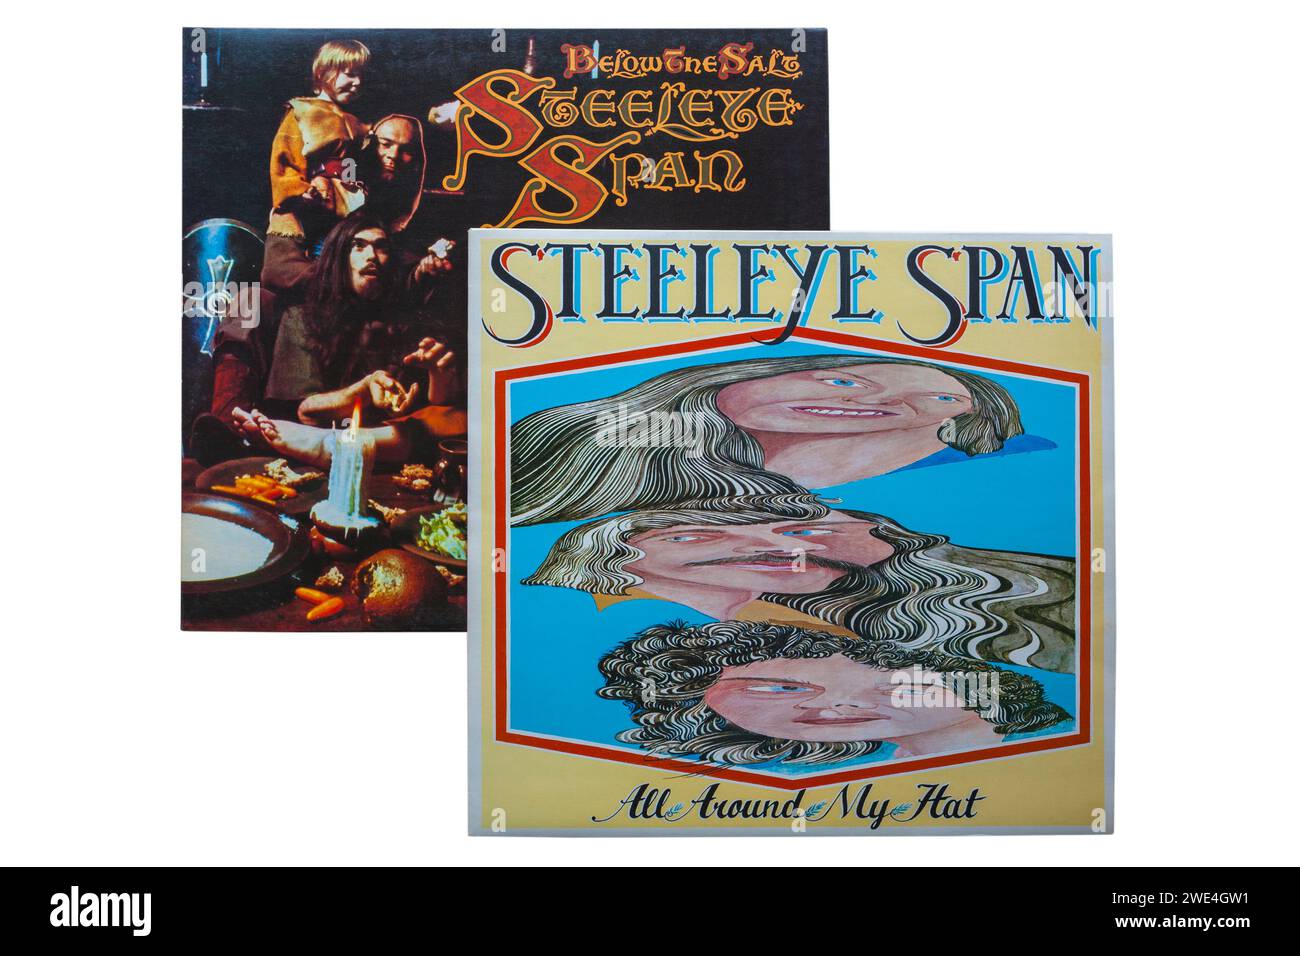 Steeleye Span All Around my Hat 1975 vinyl record album LP cover & Below the Salt 1972 vinyl record album LP cover isolated on white background Stock Photo